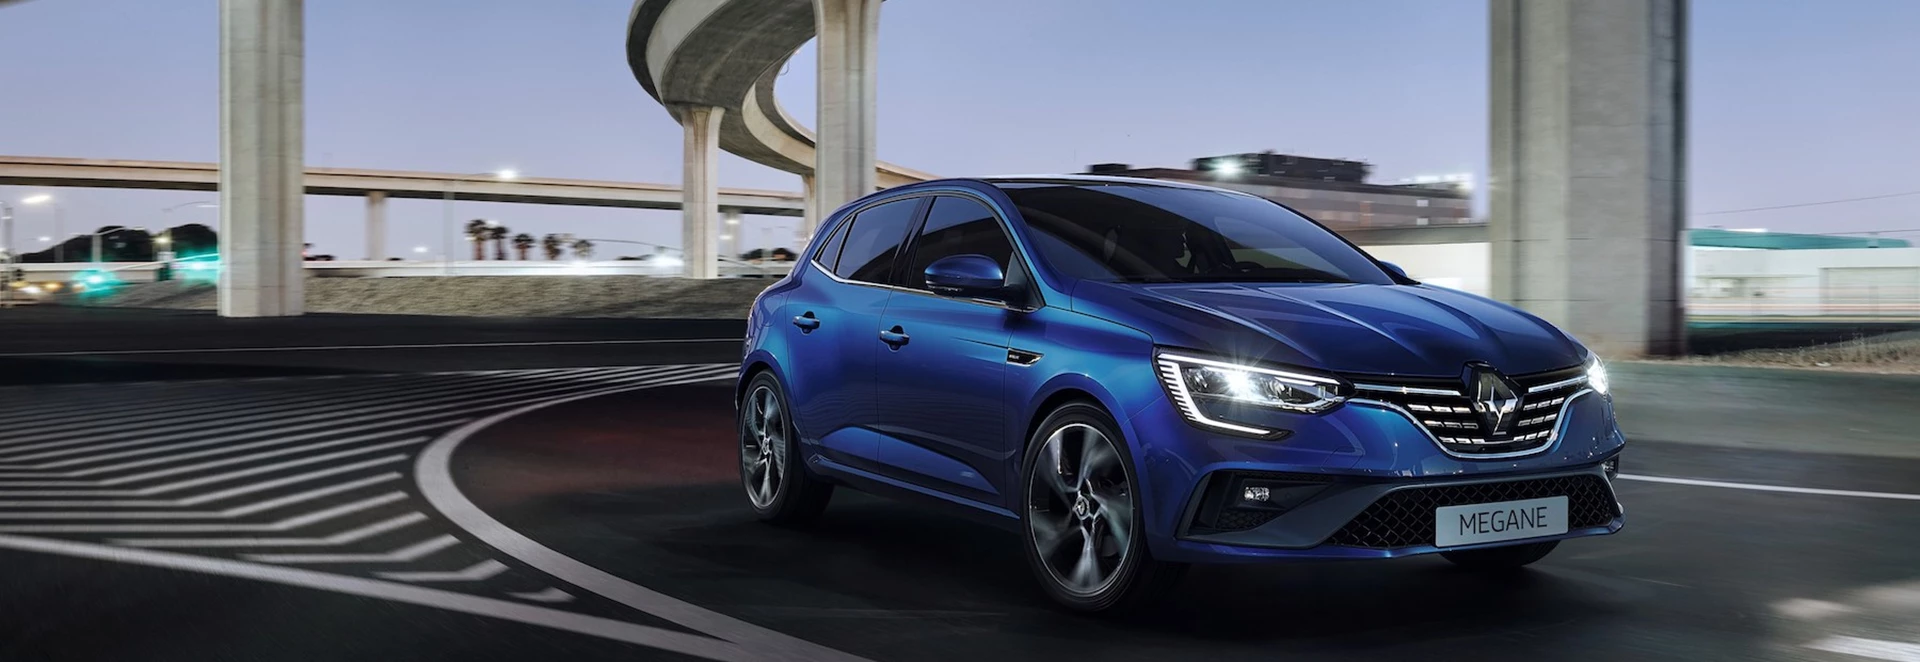 New Renault Megane revealed with new plug-in hybrid powertrain